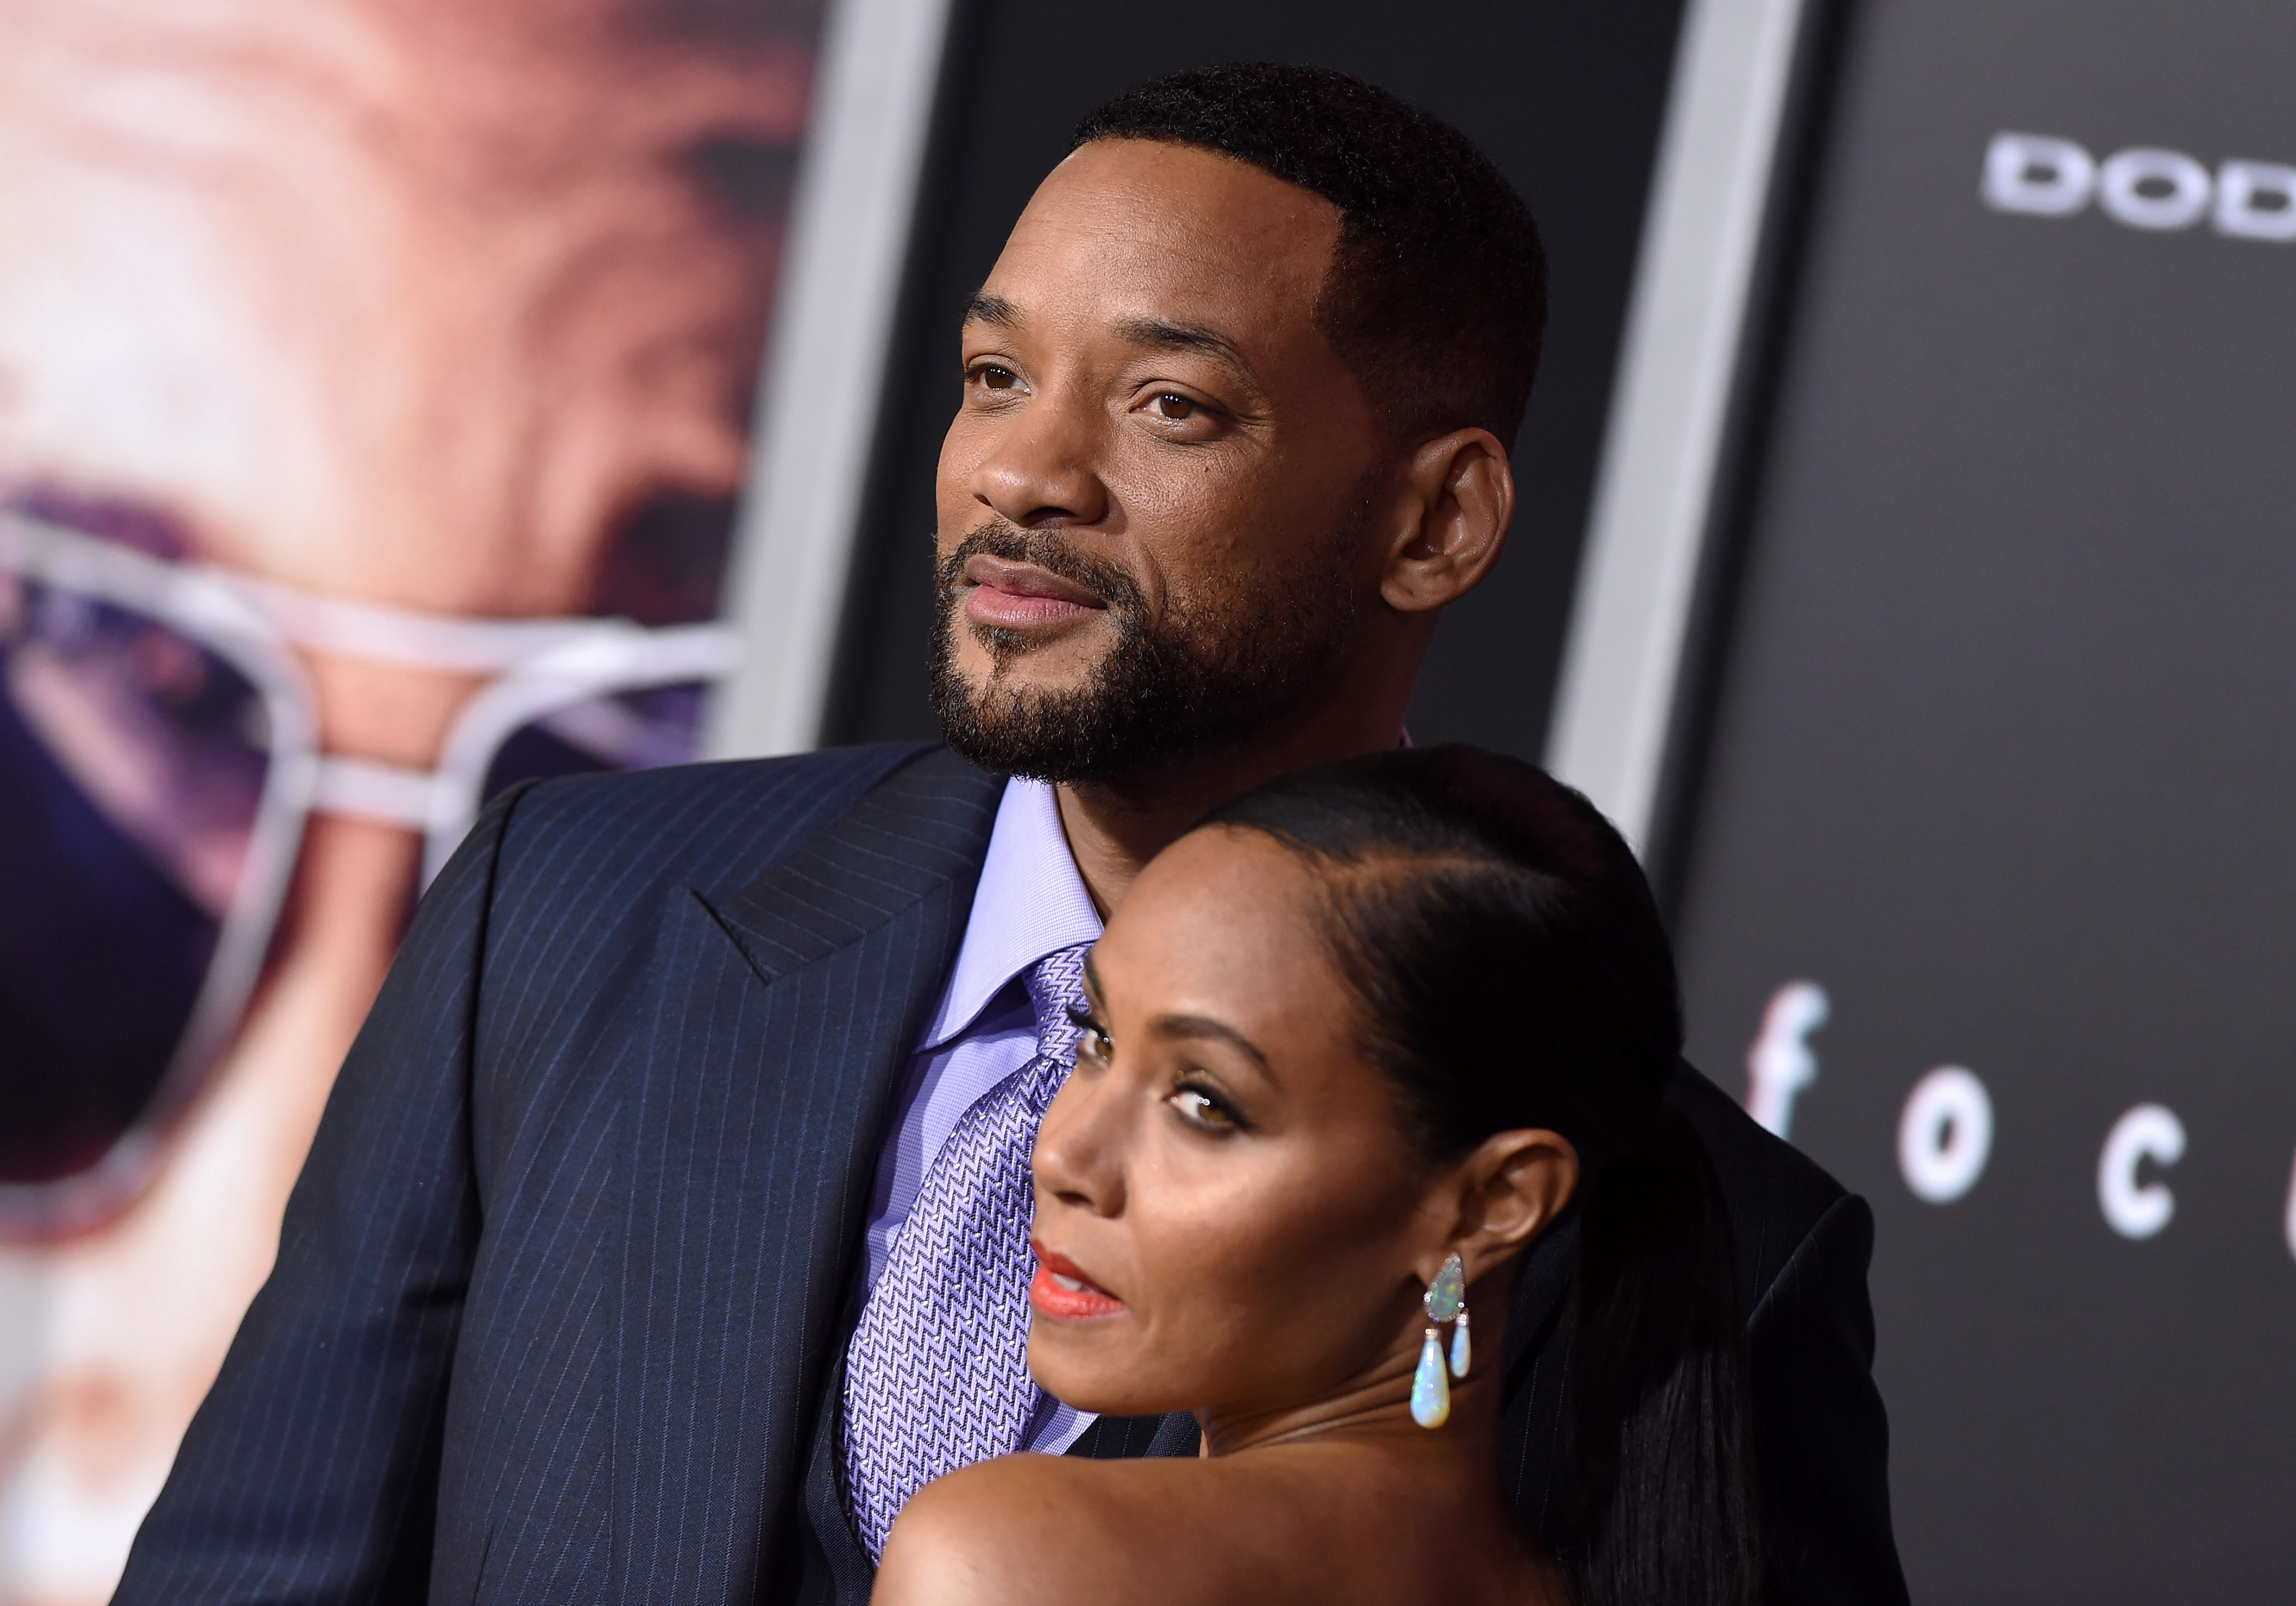 Will Smith and Jada Pinkett Smith at the L Premiere of "Focus" in Hollywood, California on February 24, 2015 | Source: Getty Images